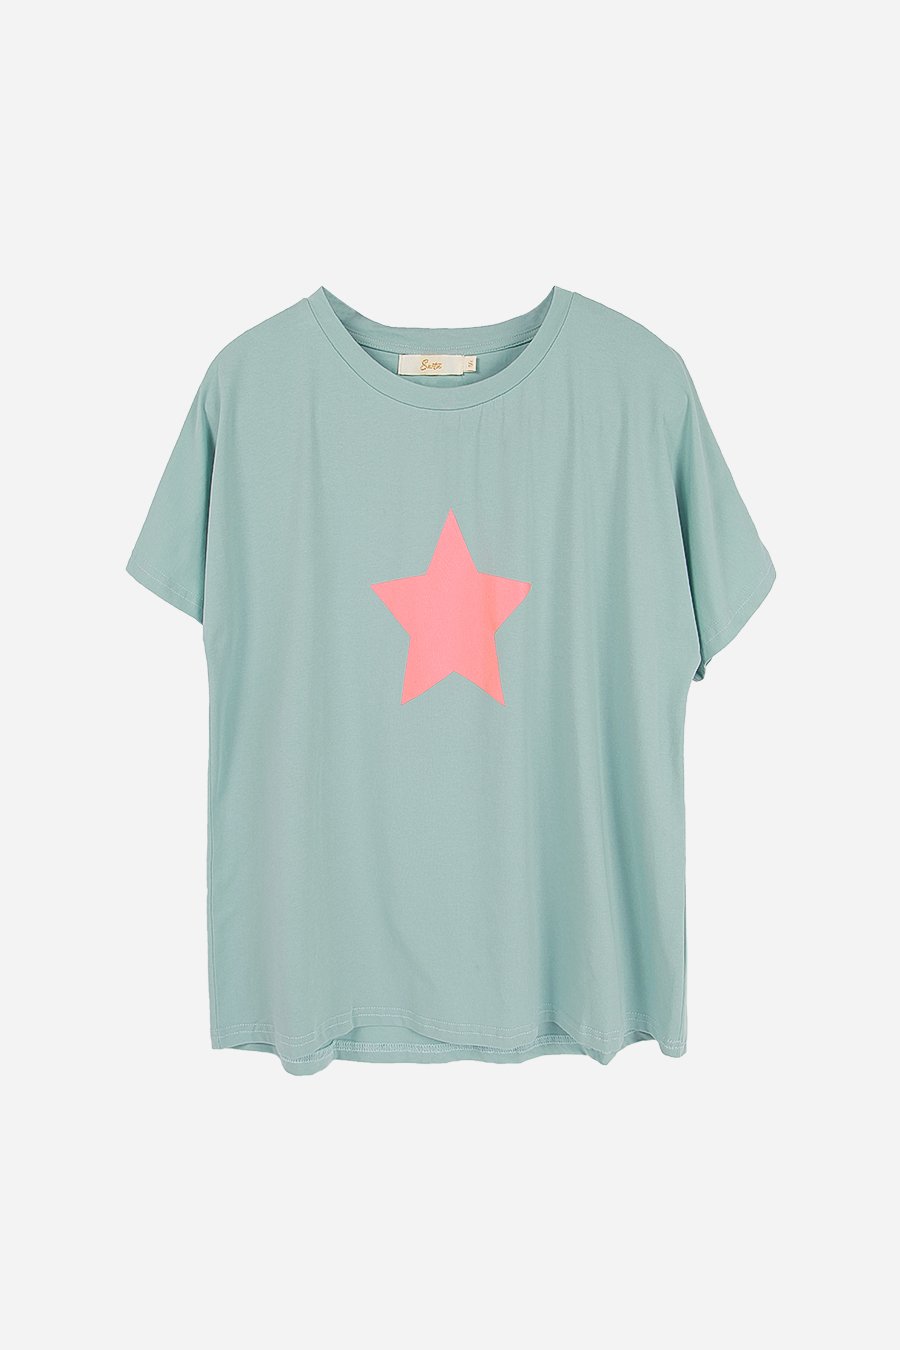 sage green t shirt with pink star